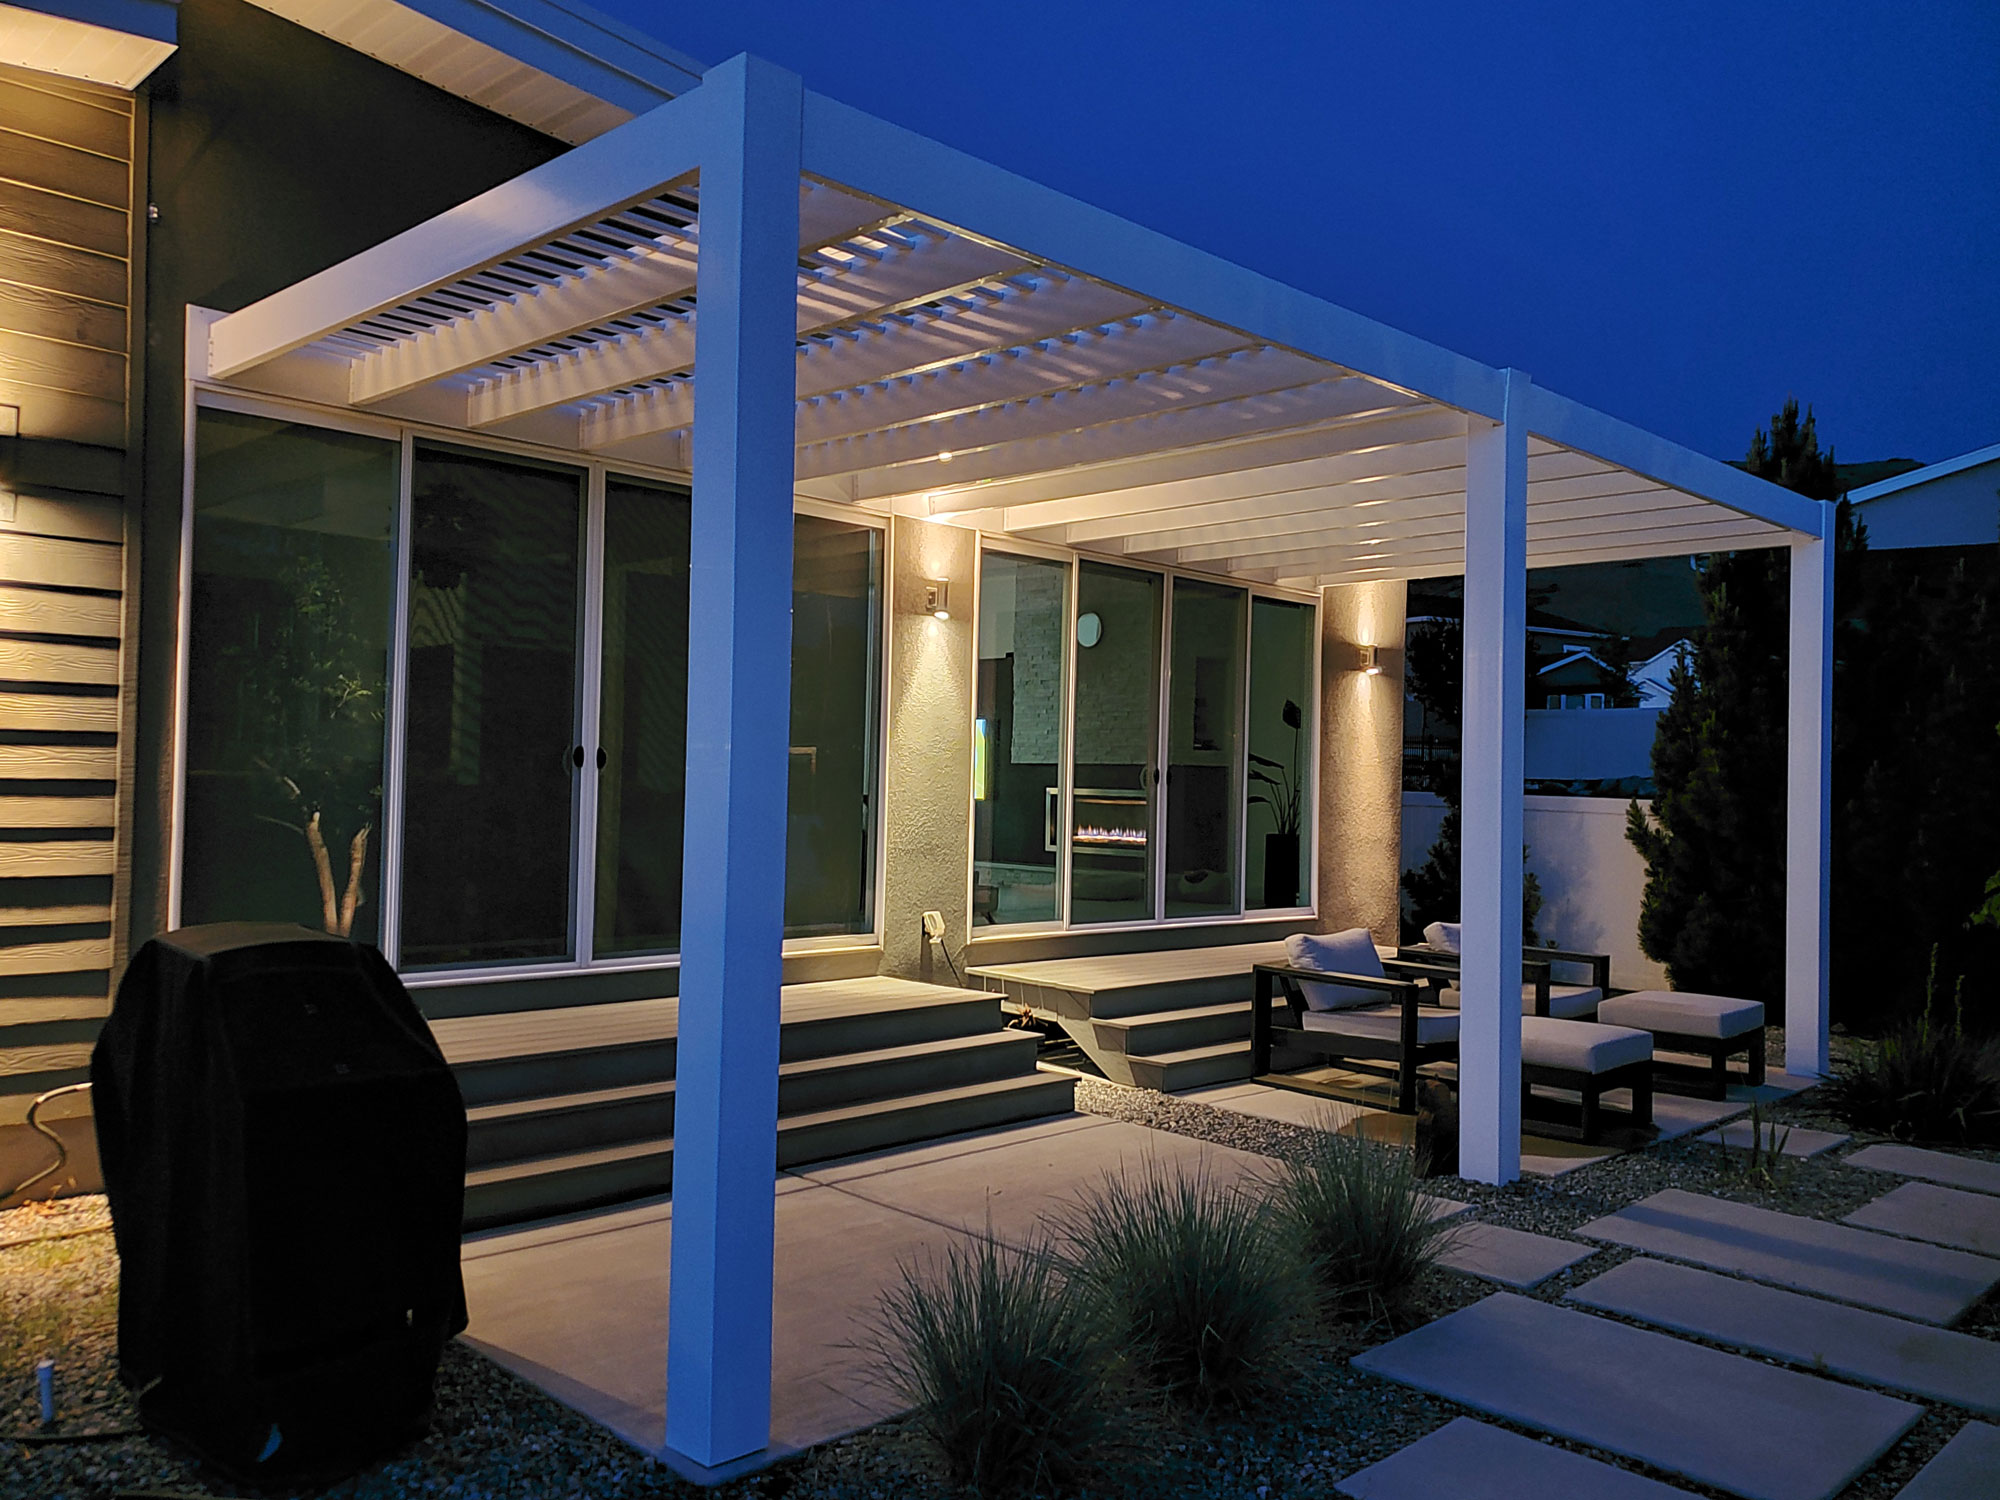 White attached modern pergola over a patio at night with lights